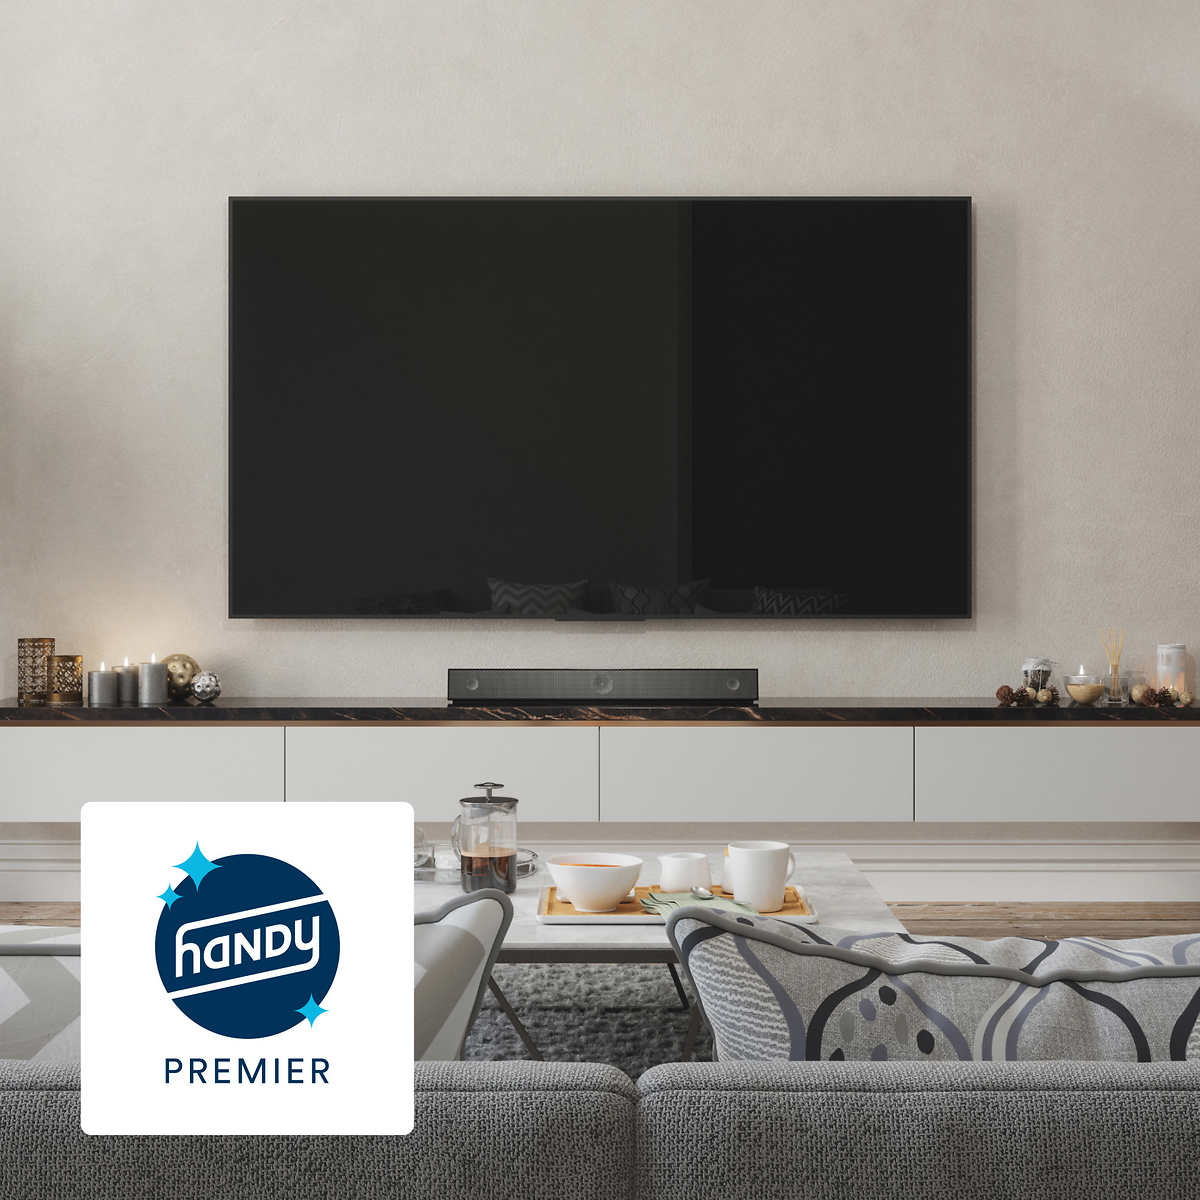 Handy Premier - TV Mounting Service with In-Wall Wire Concealment